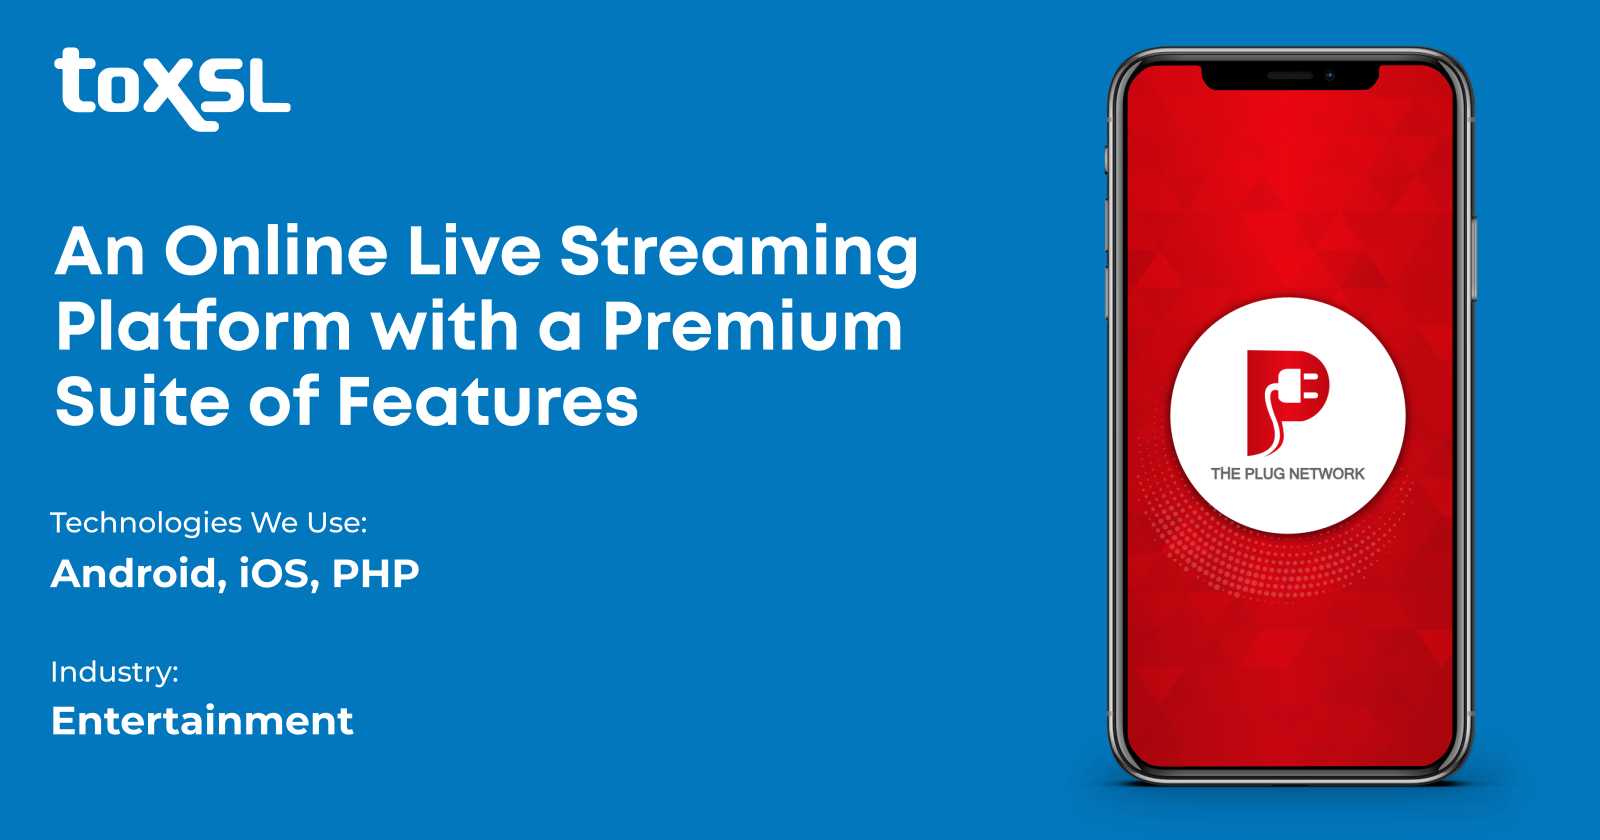 An Online Live Streaming Platform with a Premium Suite of Features